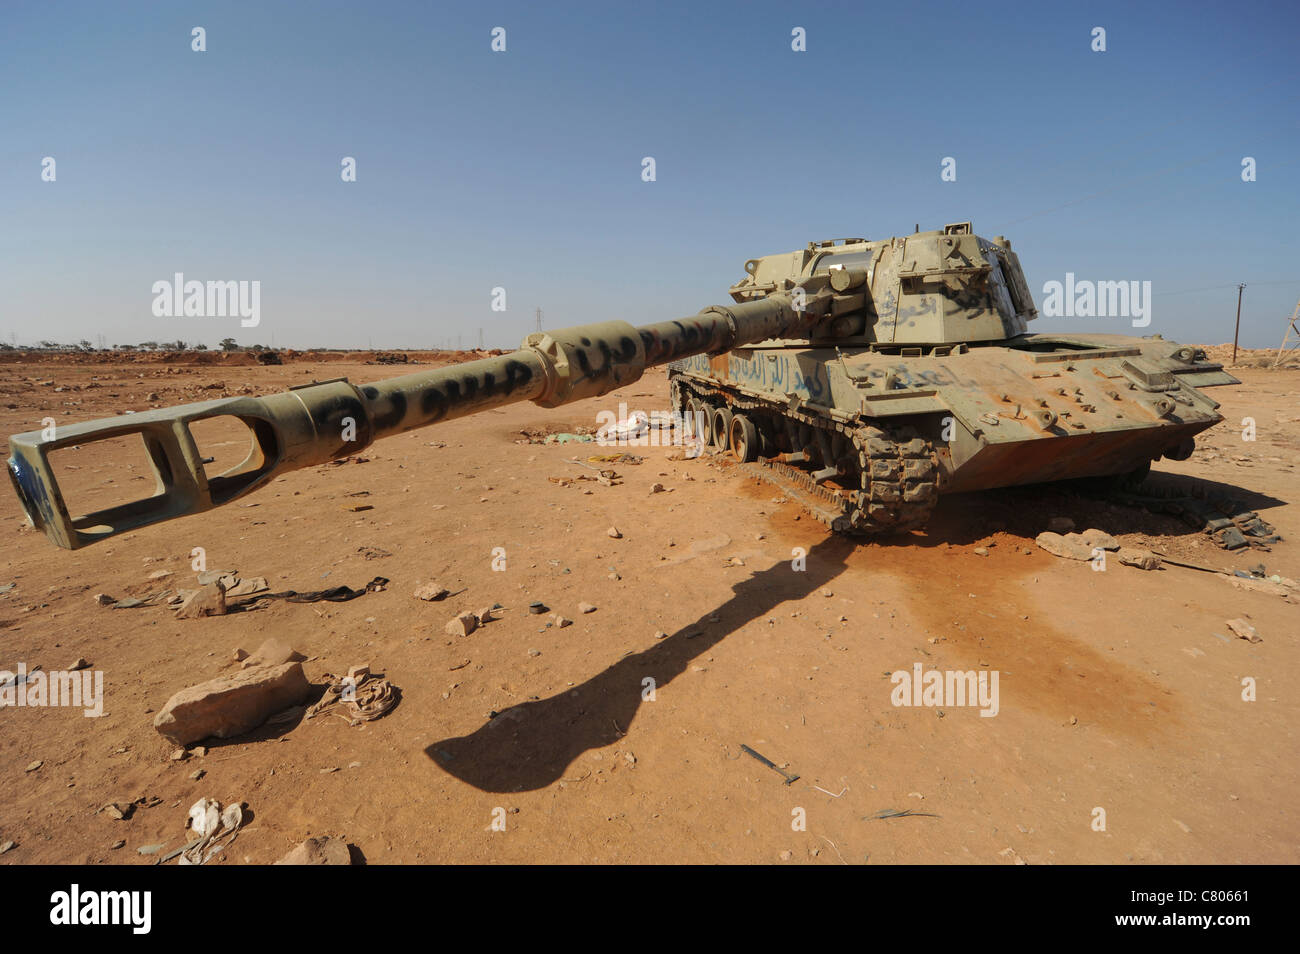 A M109 howitzer destroyed by NATO forces in the desert outside Benghazi, Libya. Stock Photo